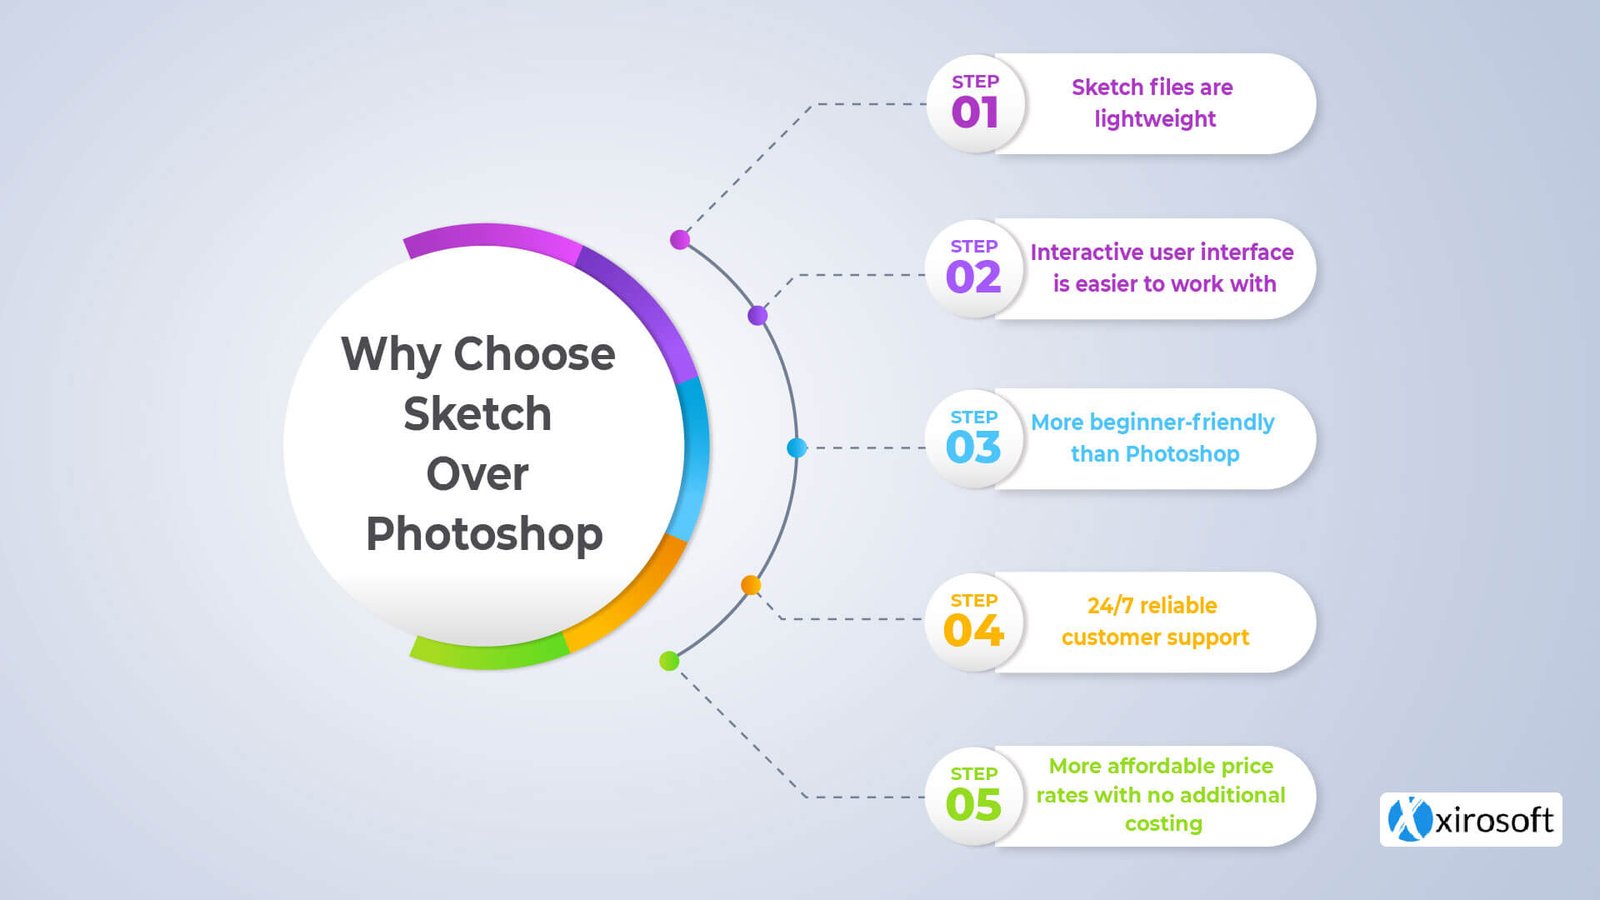 Unleashing the Power of Sketch to HTML Service | Your Ultimate Guide